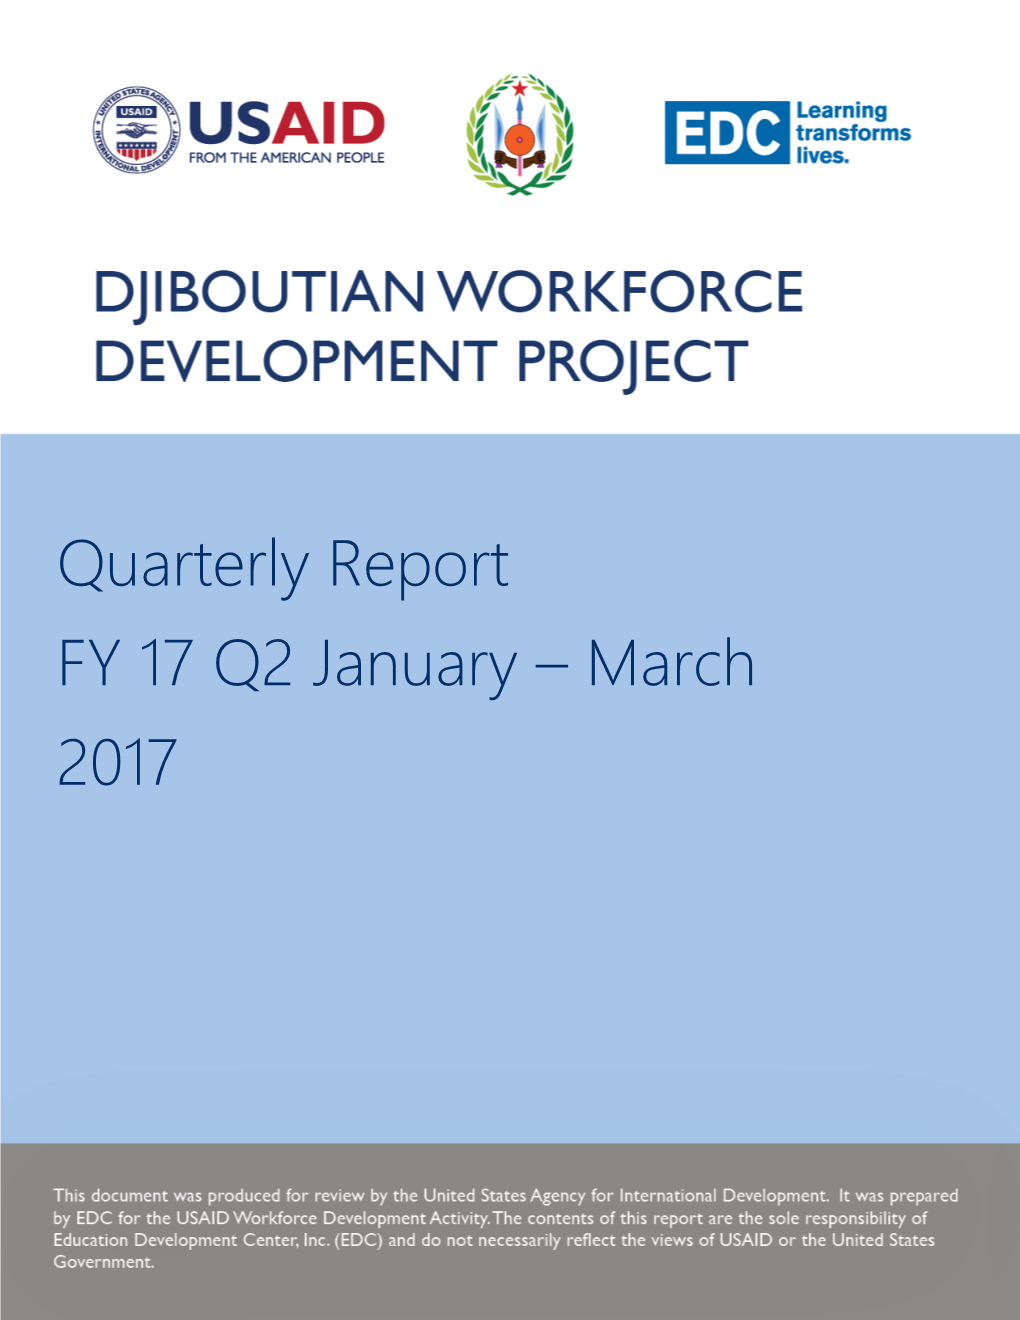 Quarterly Report FY 17 Q2 January – March 2017